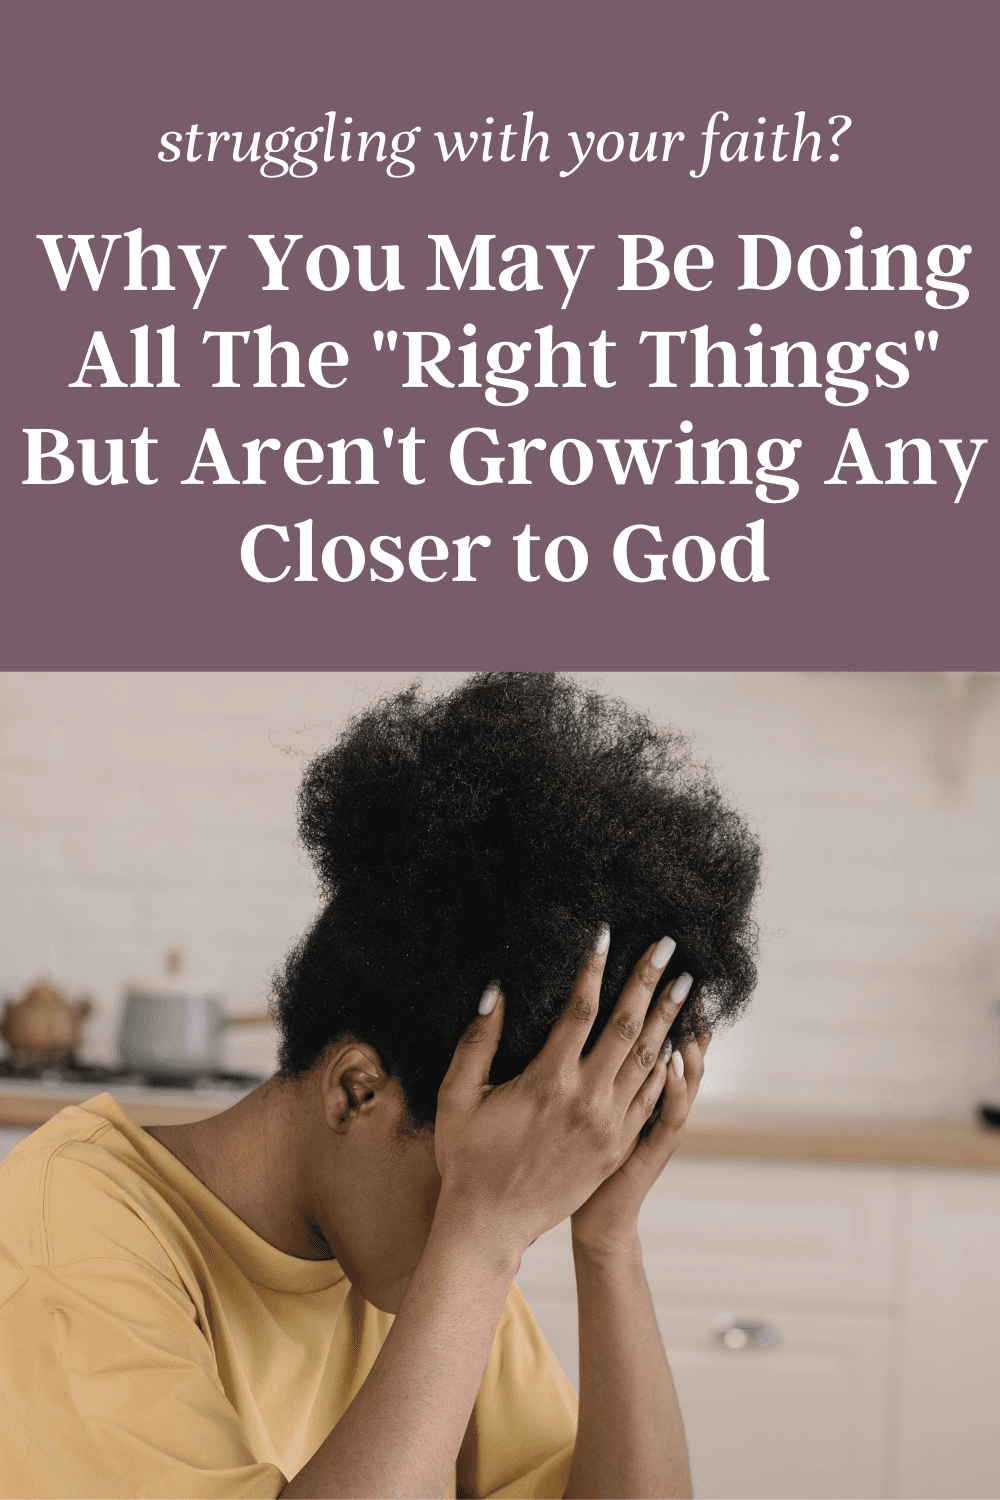 As an introverted Christian woman it can be hard to grow closer to God? Learn the real reason that all the "right things" aren't working for you - plus, tips about how to strengthen your faith as an HSP or highly sensitive introverted Christian woman.